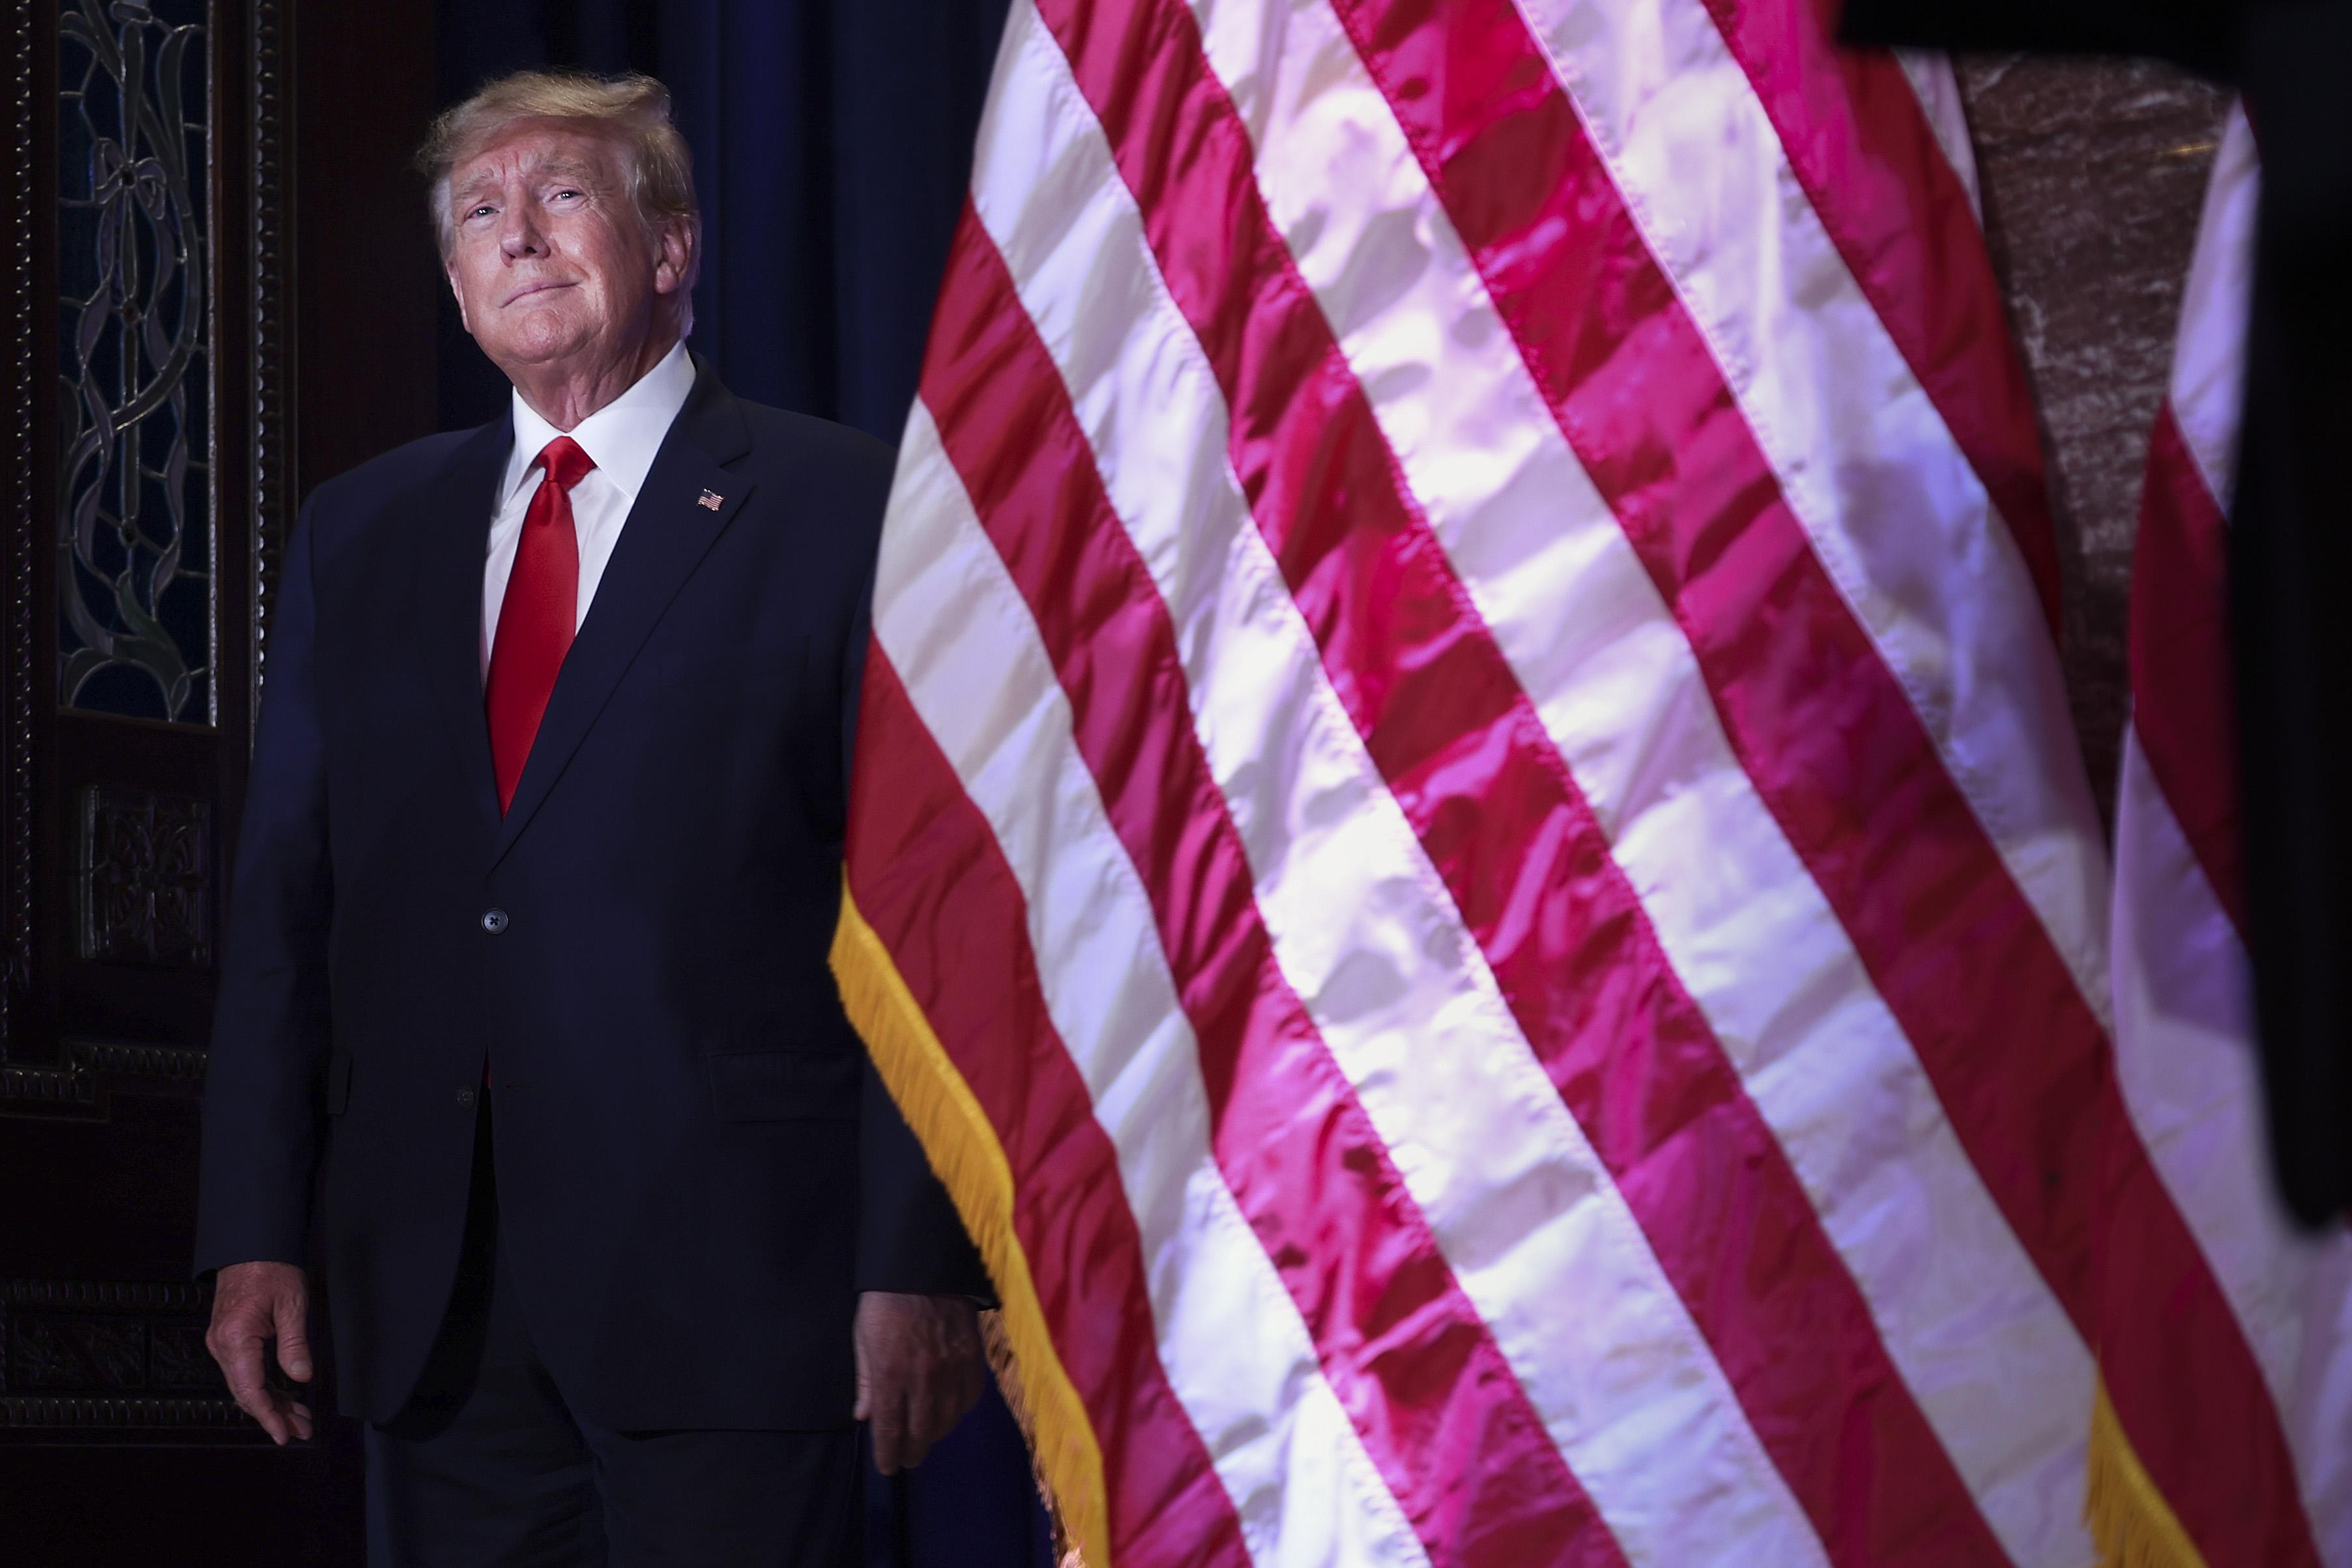 Former U.S. President Donald Trump stands next to an American flag.